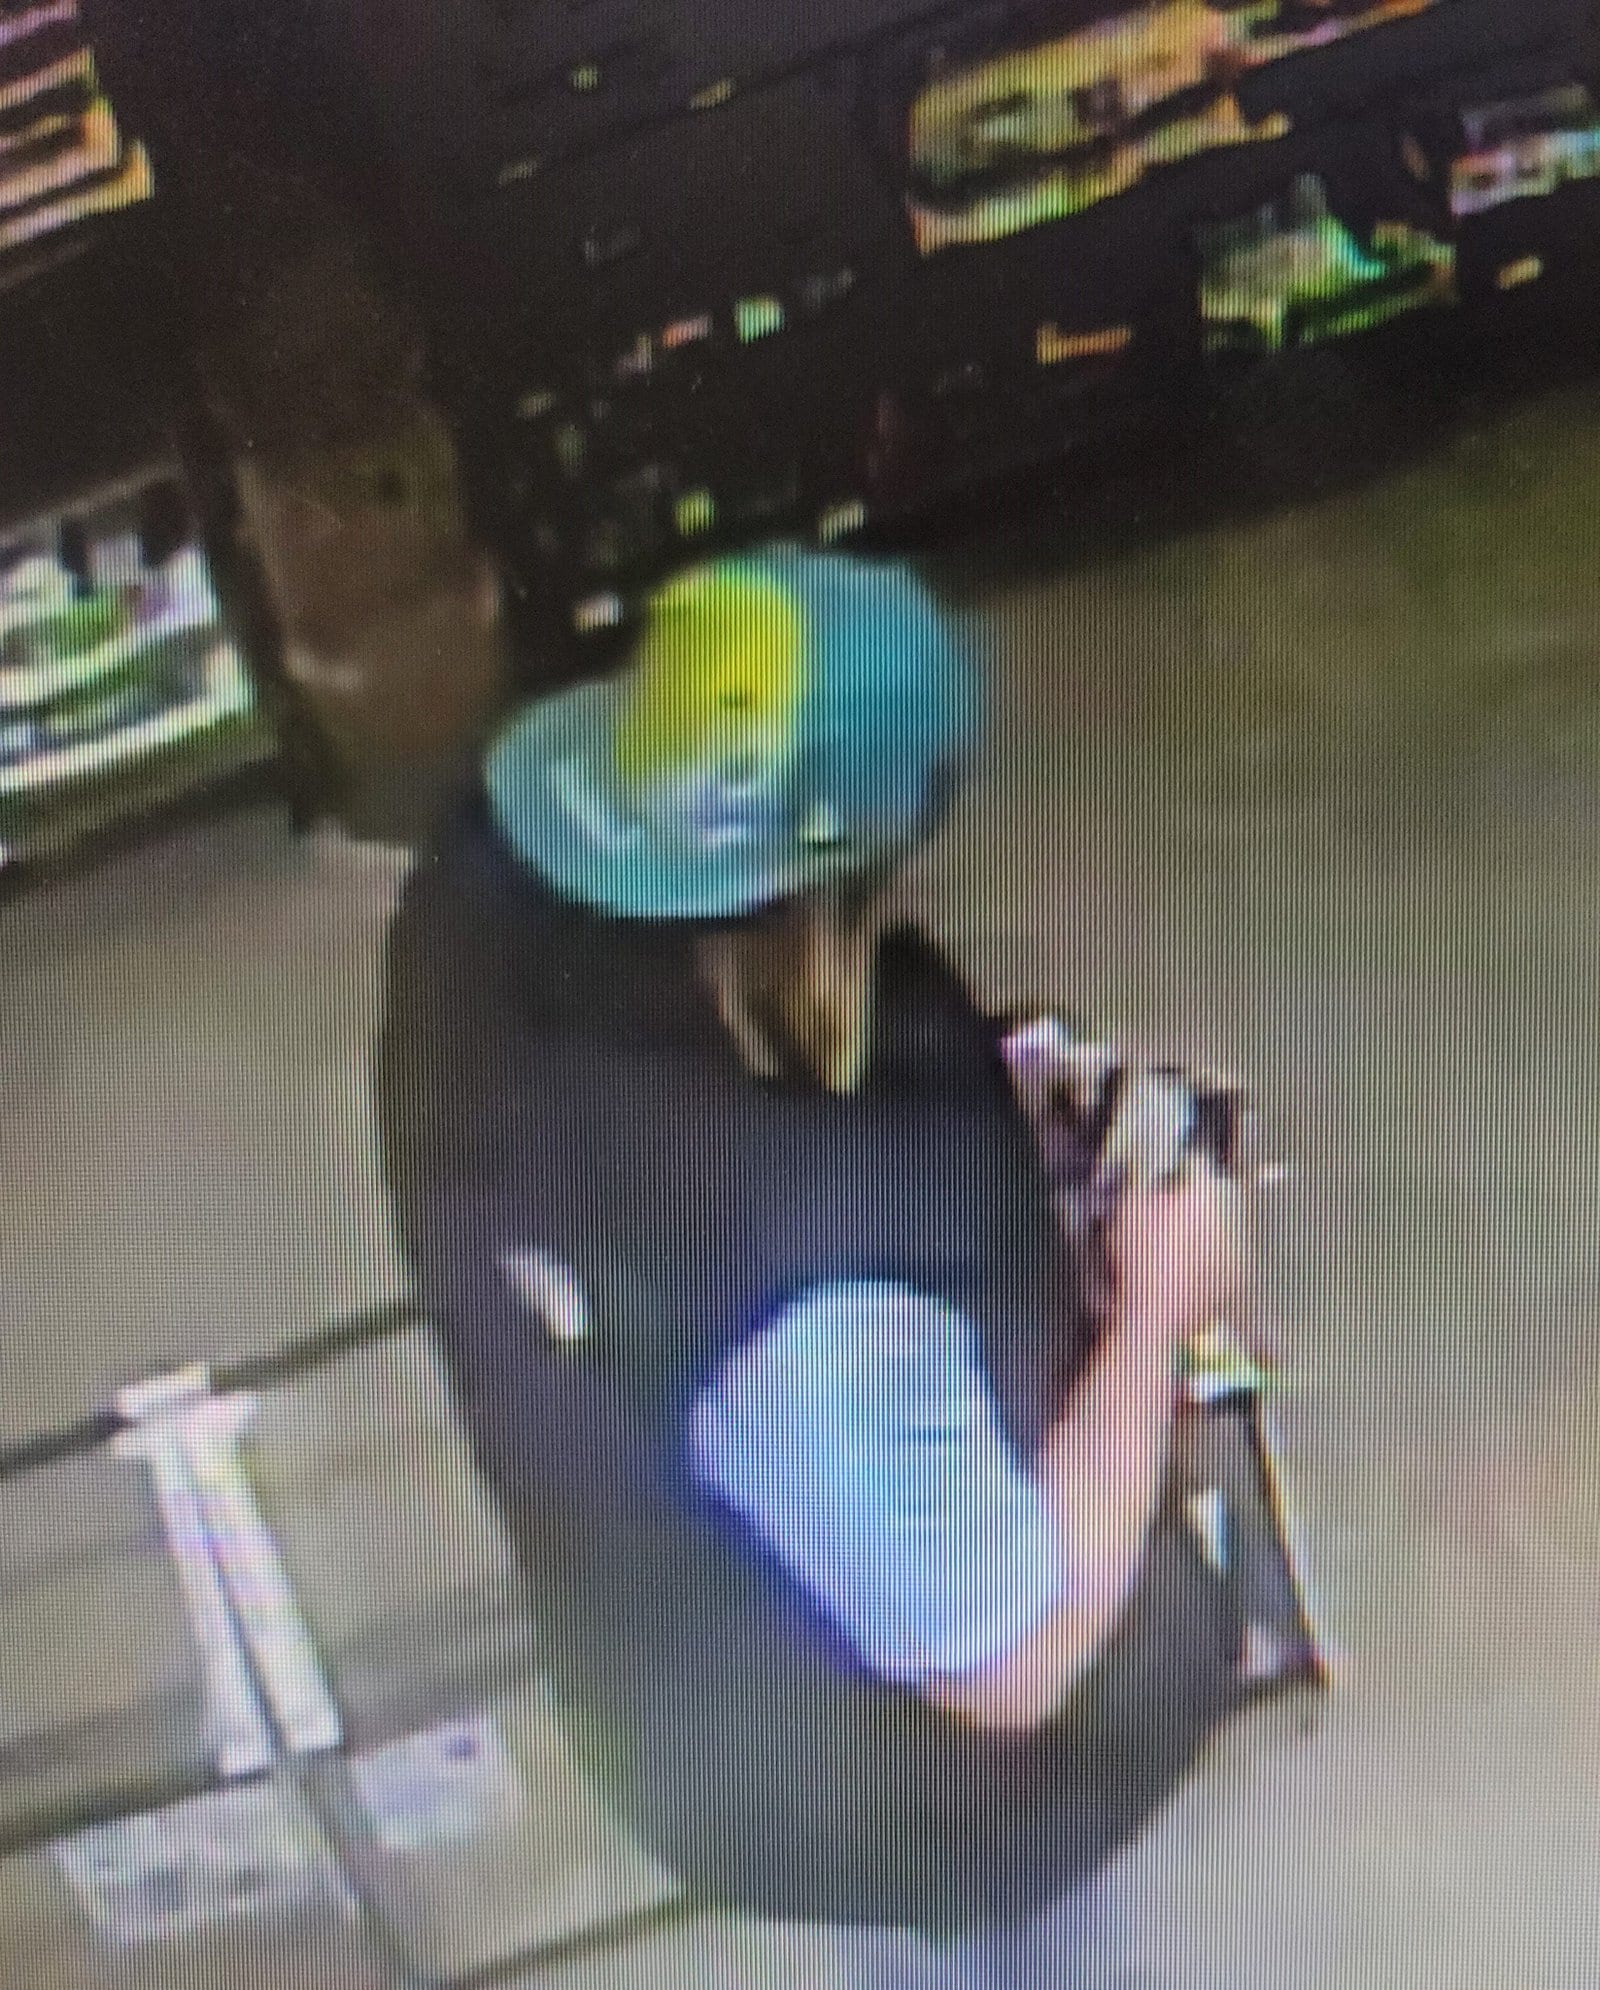 Shrewsbury police investigate wallet theft from Petco